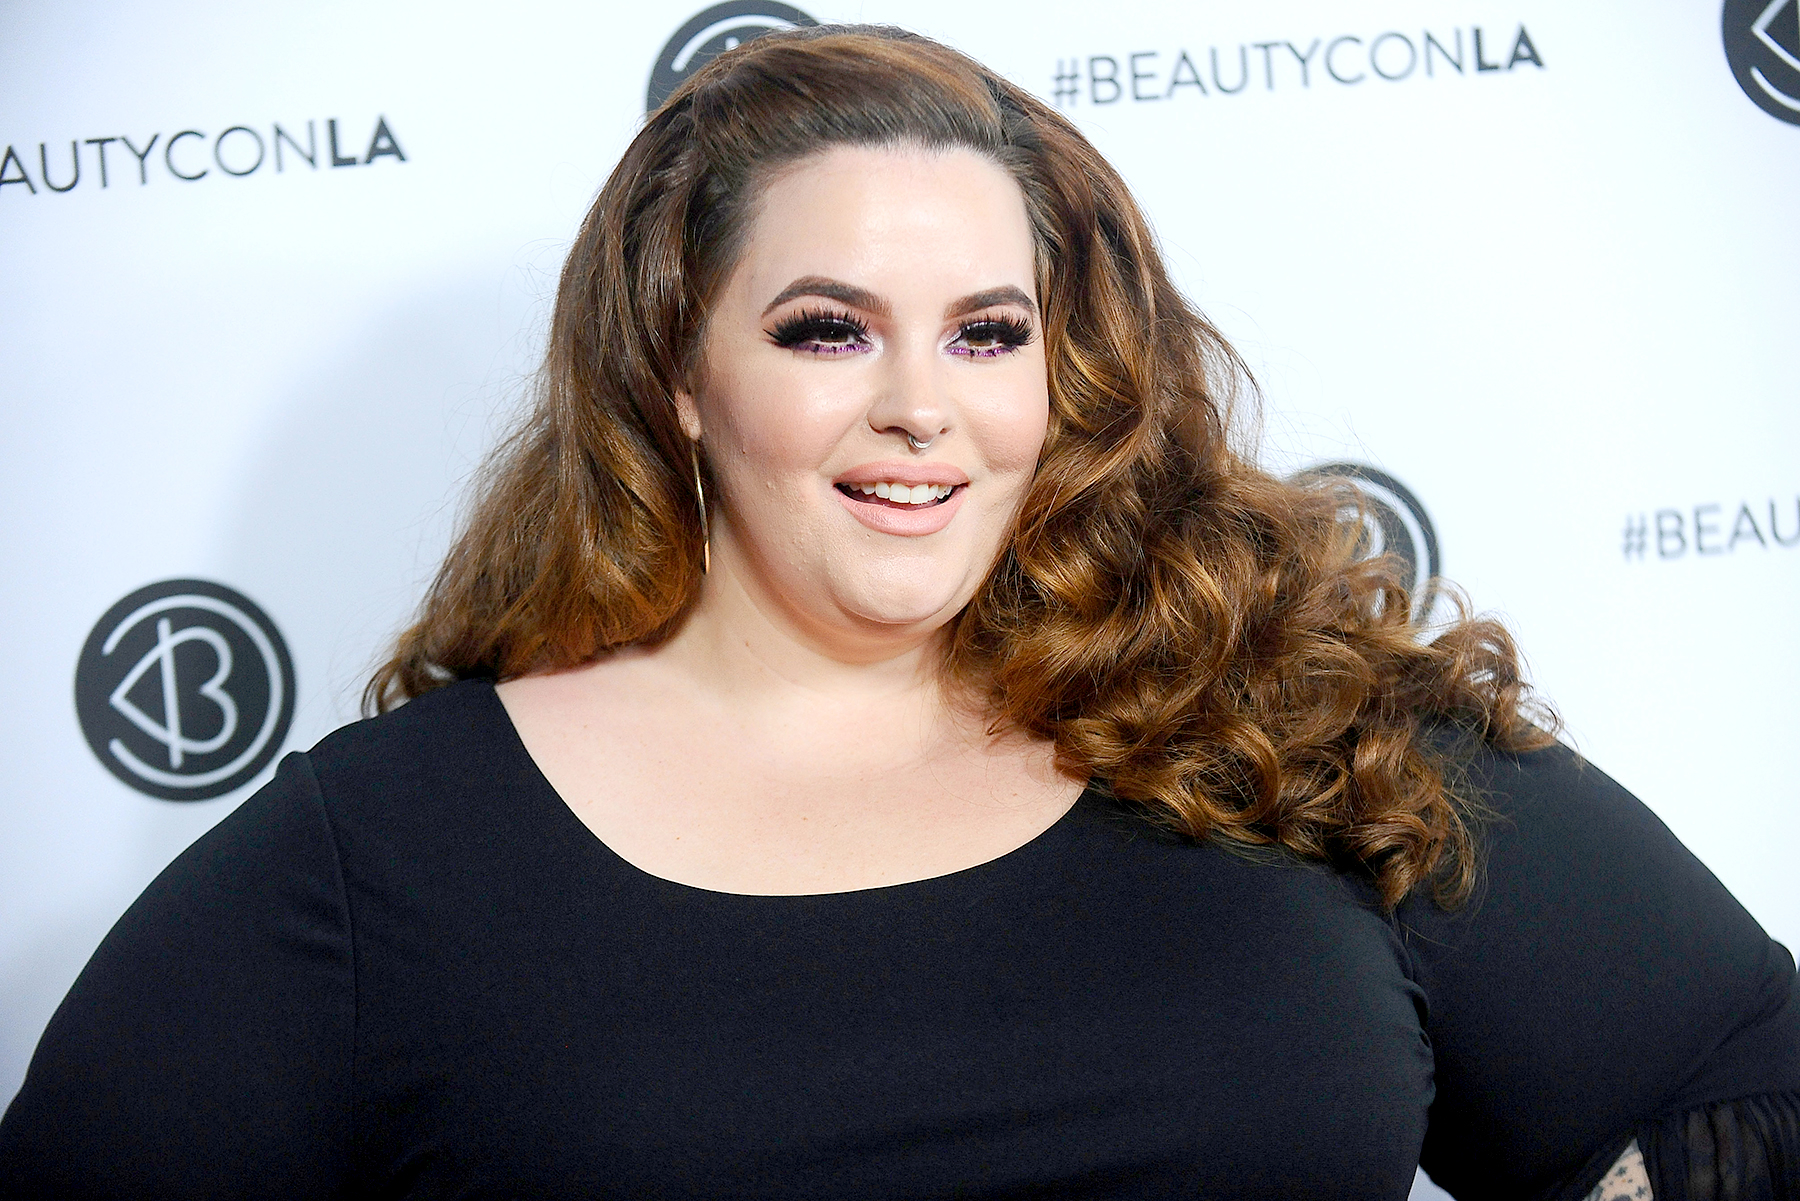 Model Tess Holliday navigates life in the mainstream